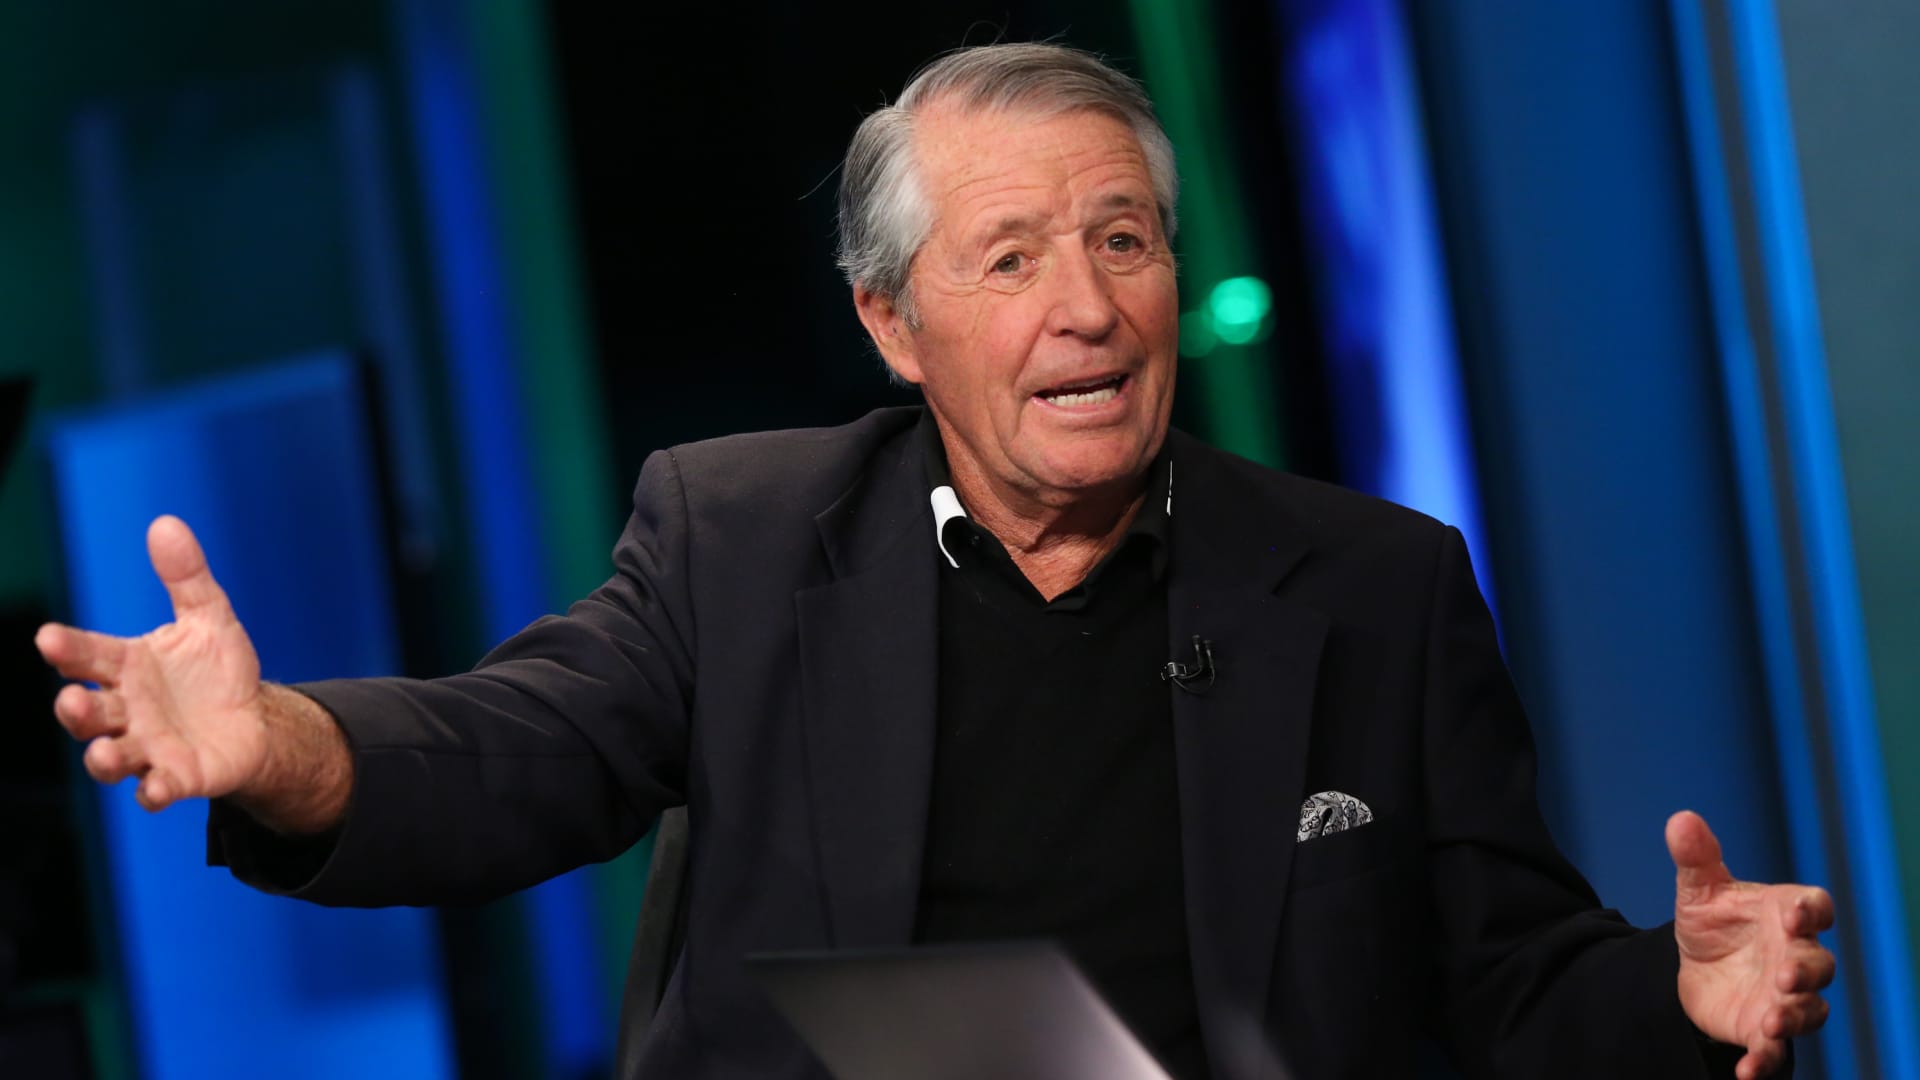 Gary Player says government should stay out of sports